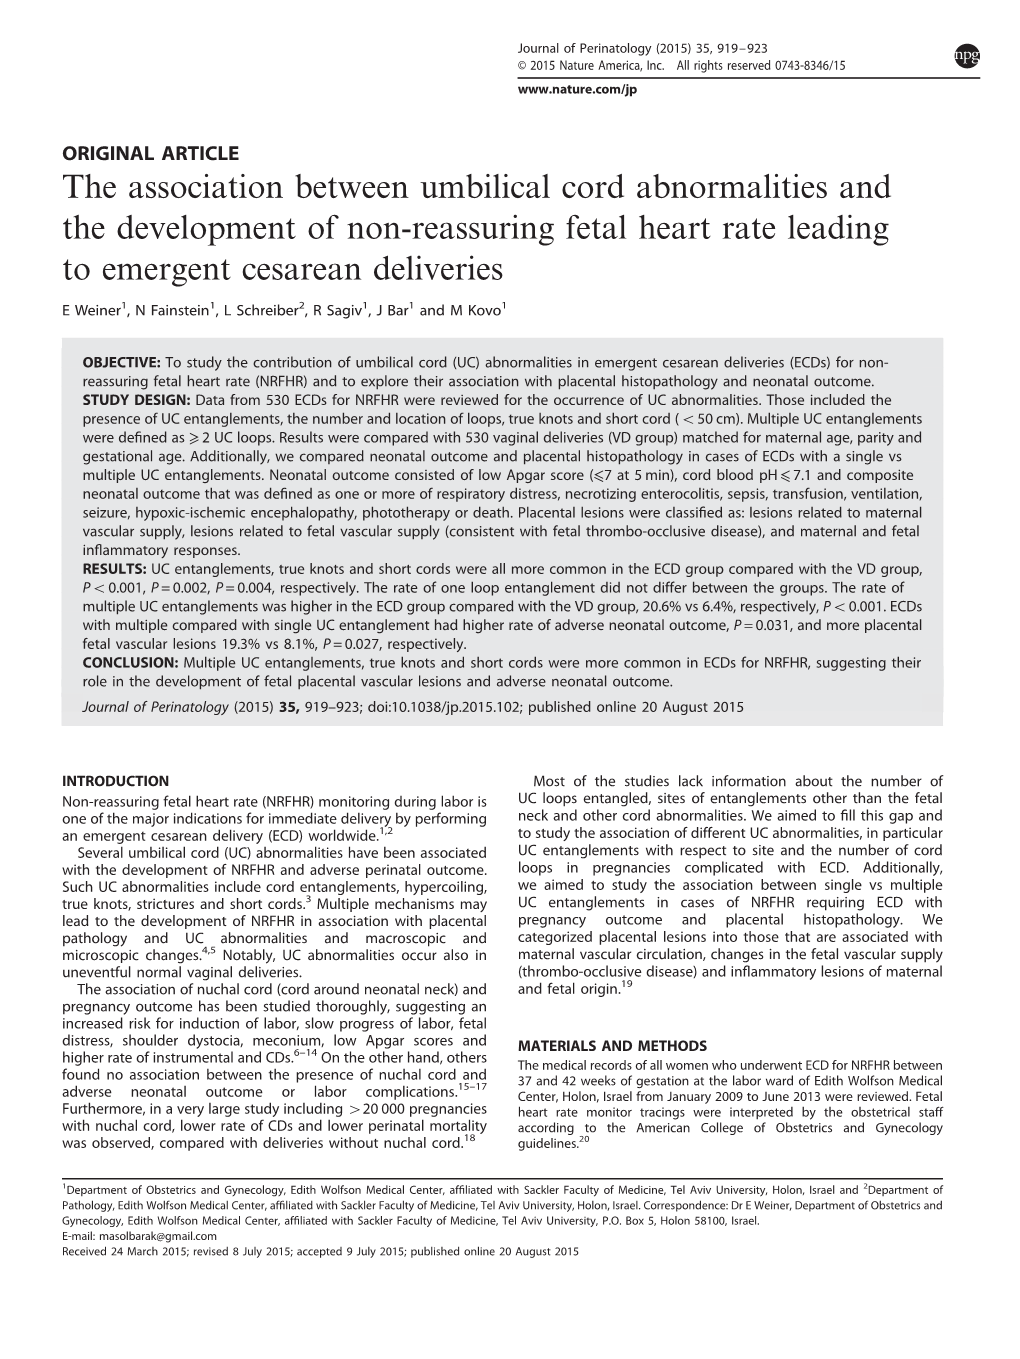 The Association Between Umbilical Cord Abnormalities and the Development of Non-Reassuring Fetal Heart Rate Leading to Emergent Cesarean Deliveries